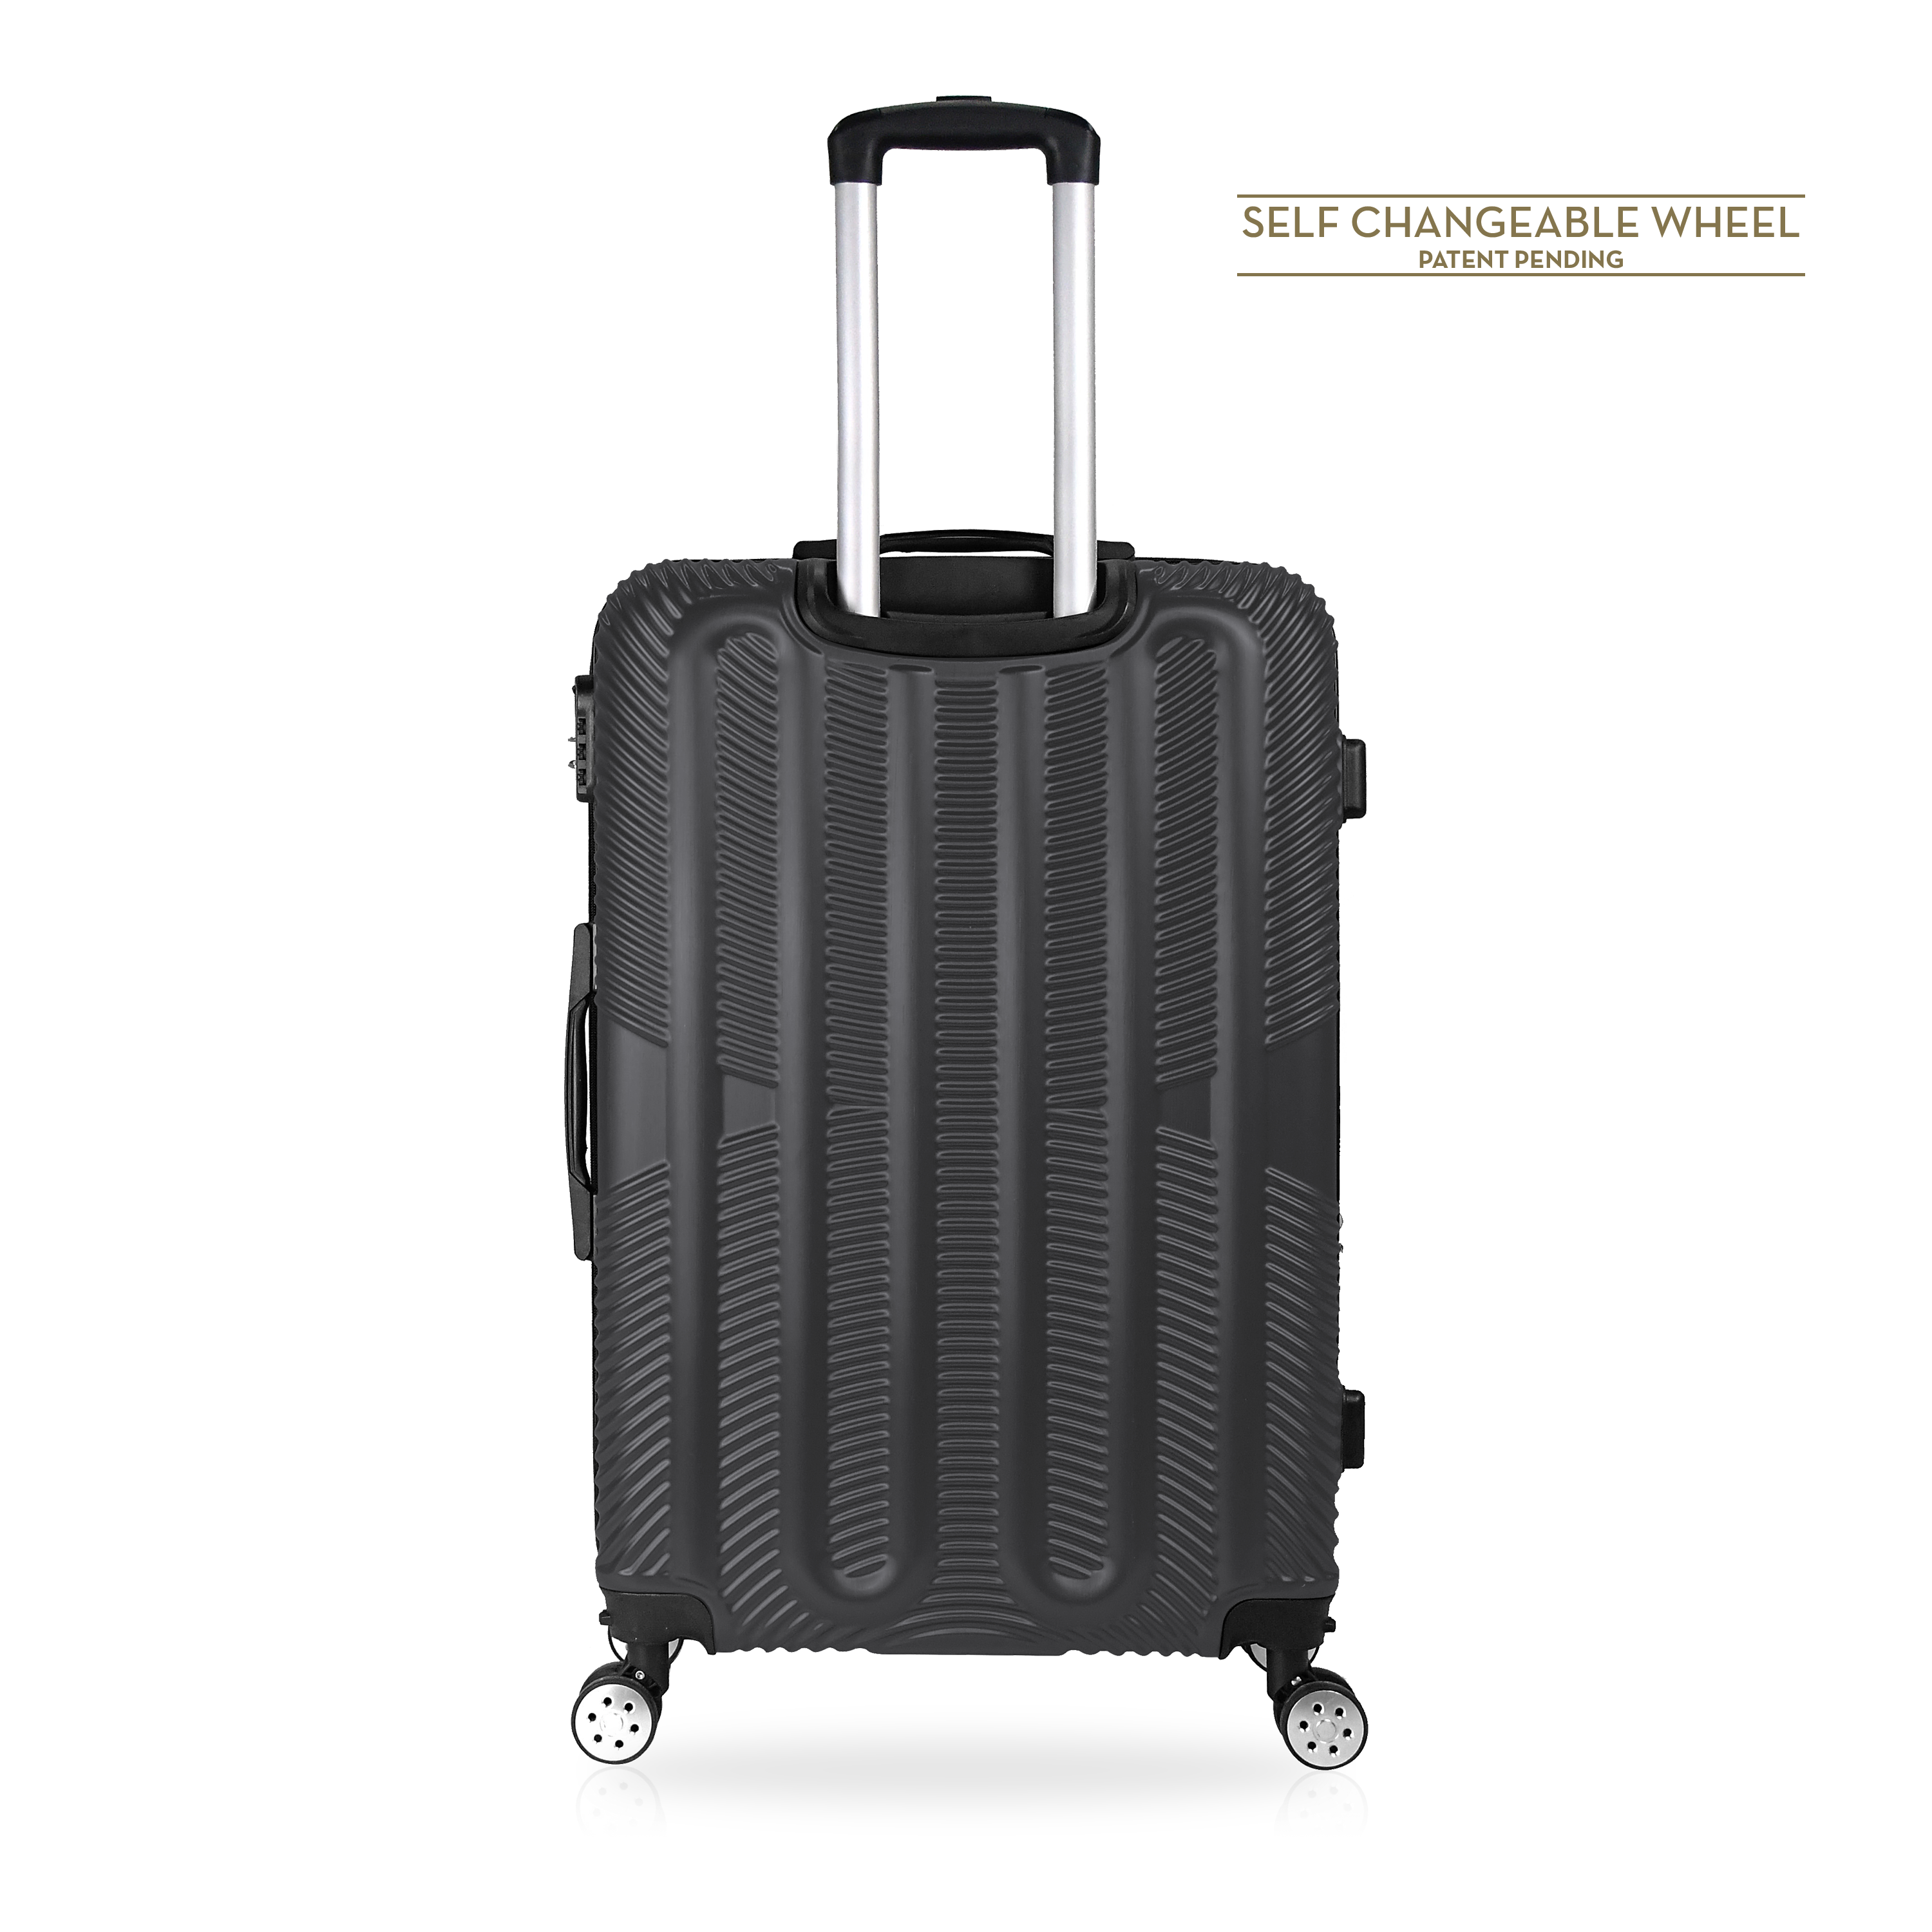 TUCCI Italy SPECIALI 3 Piece (20", 28", 30") Detachable Spinner Wheel Suitcase Set